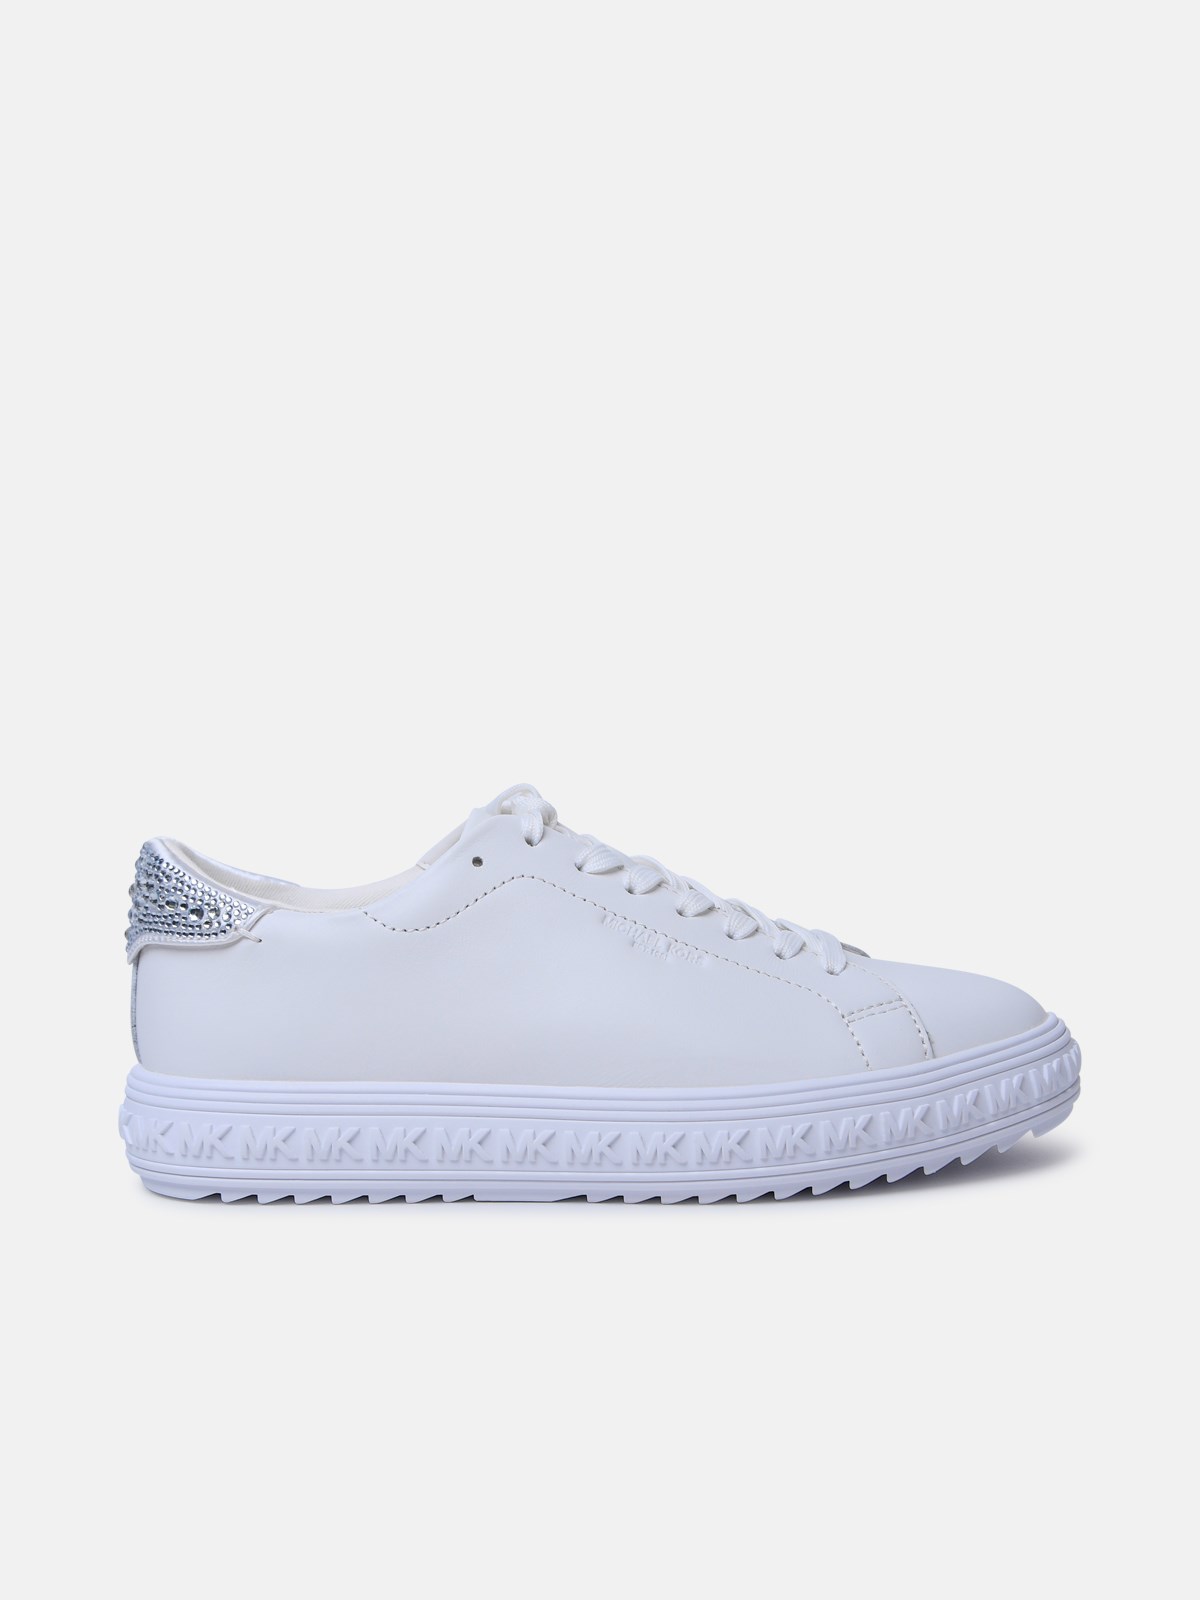 Michael Michael Kors 'grove' Black Leather Sneakers In White